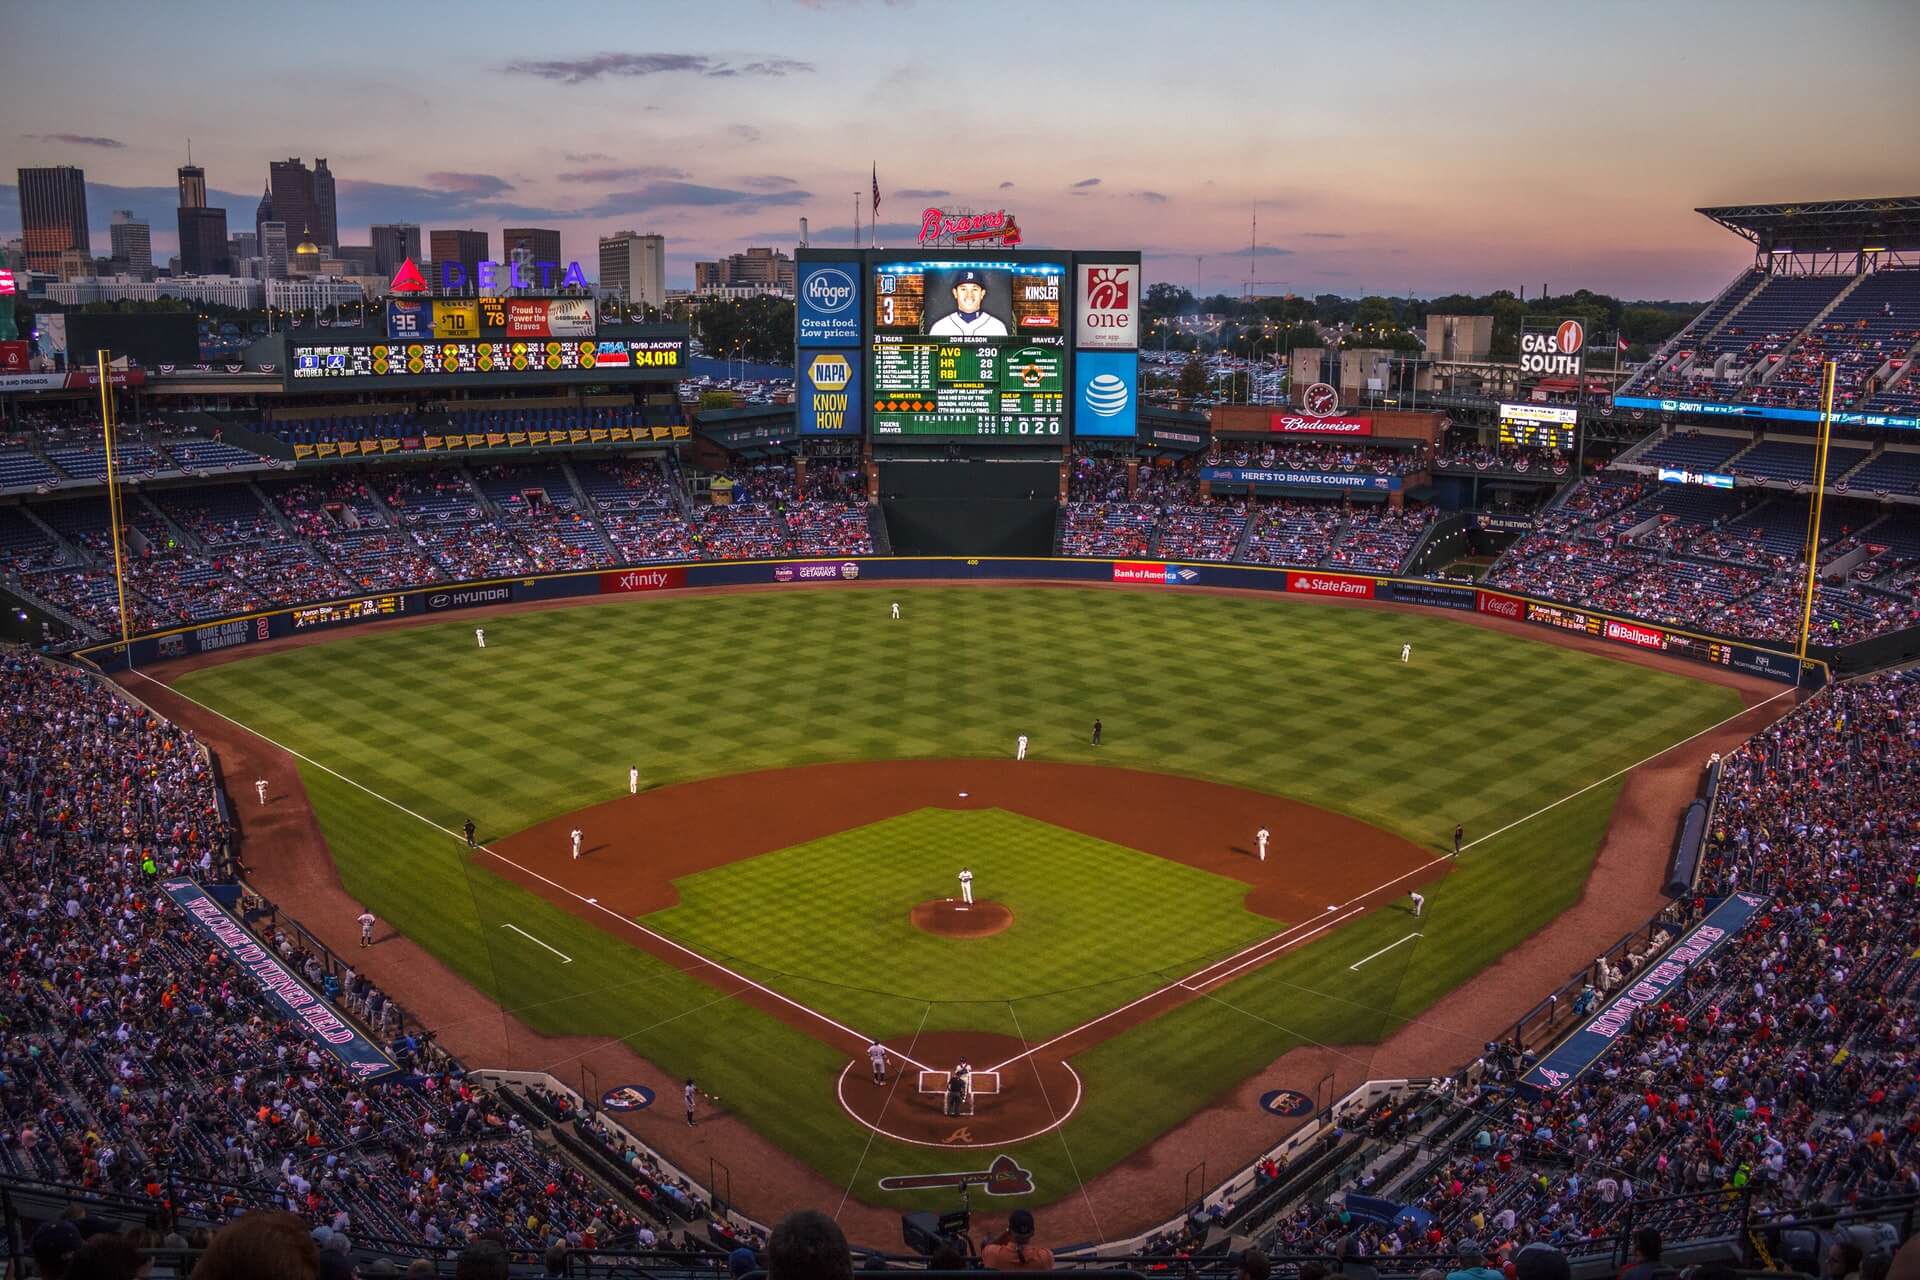 SBJ Marketing: Capital One set to get MLB banking rights